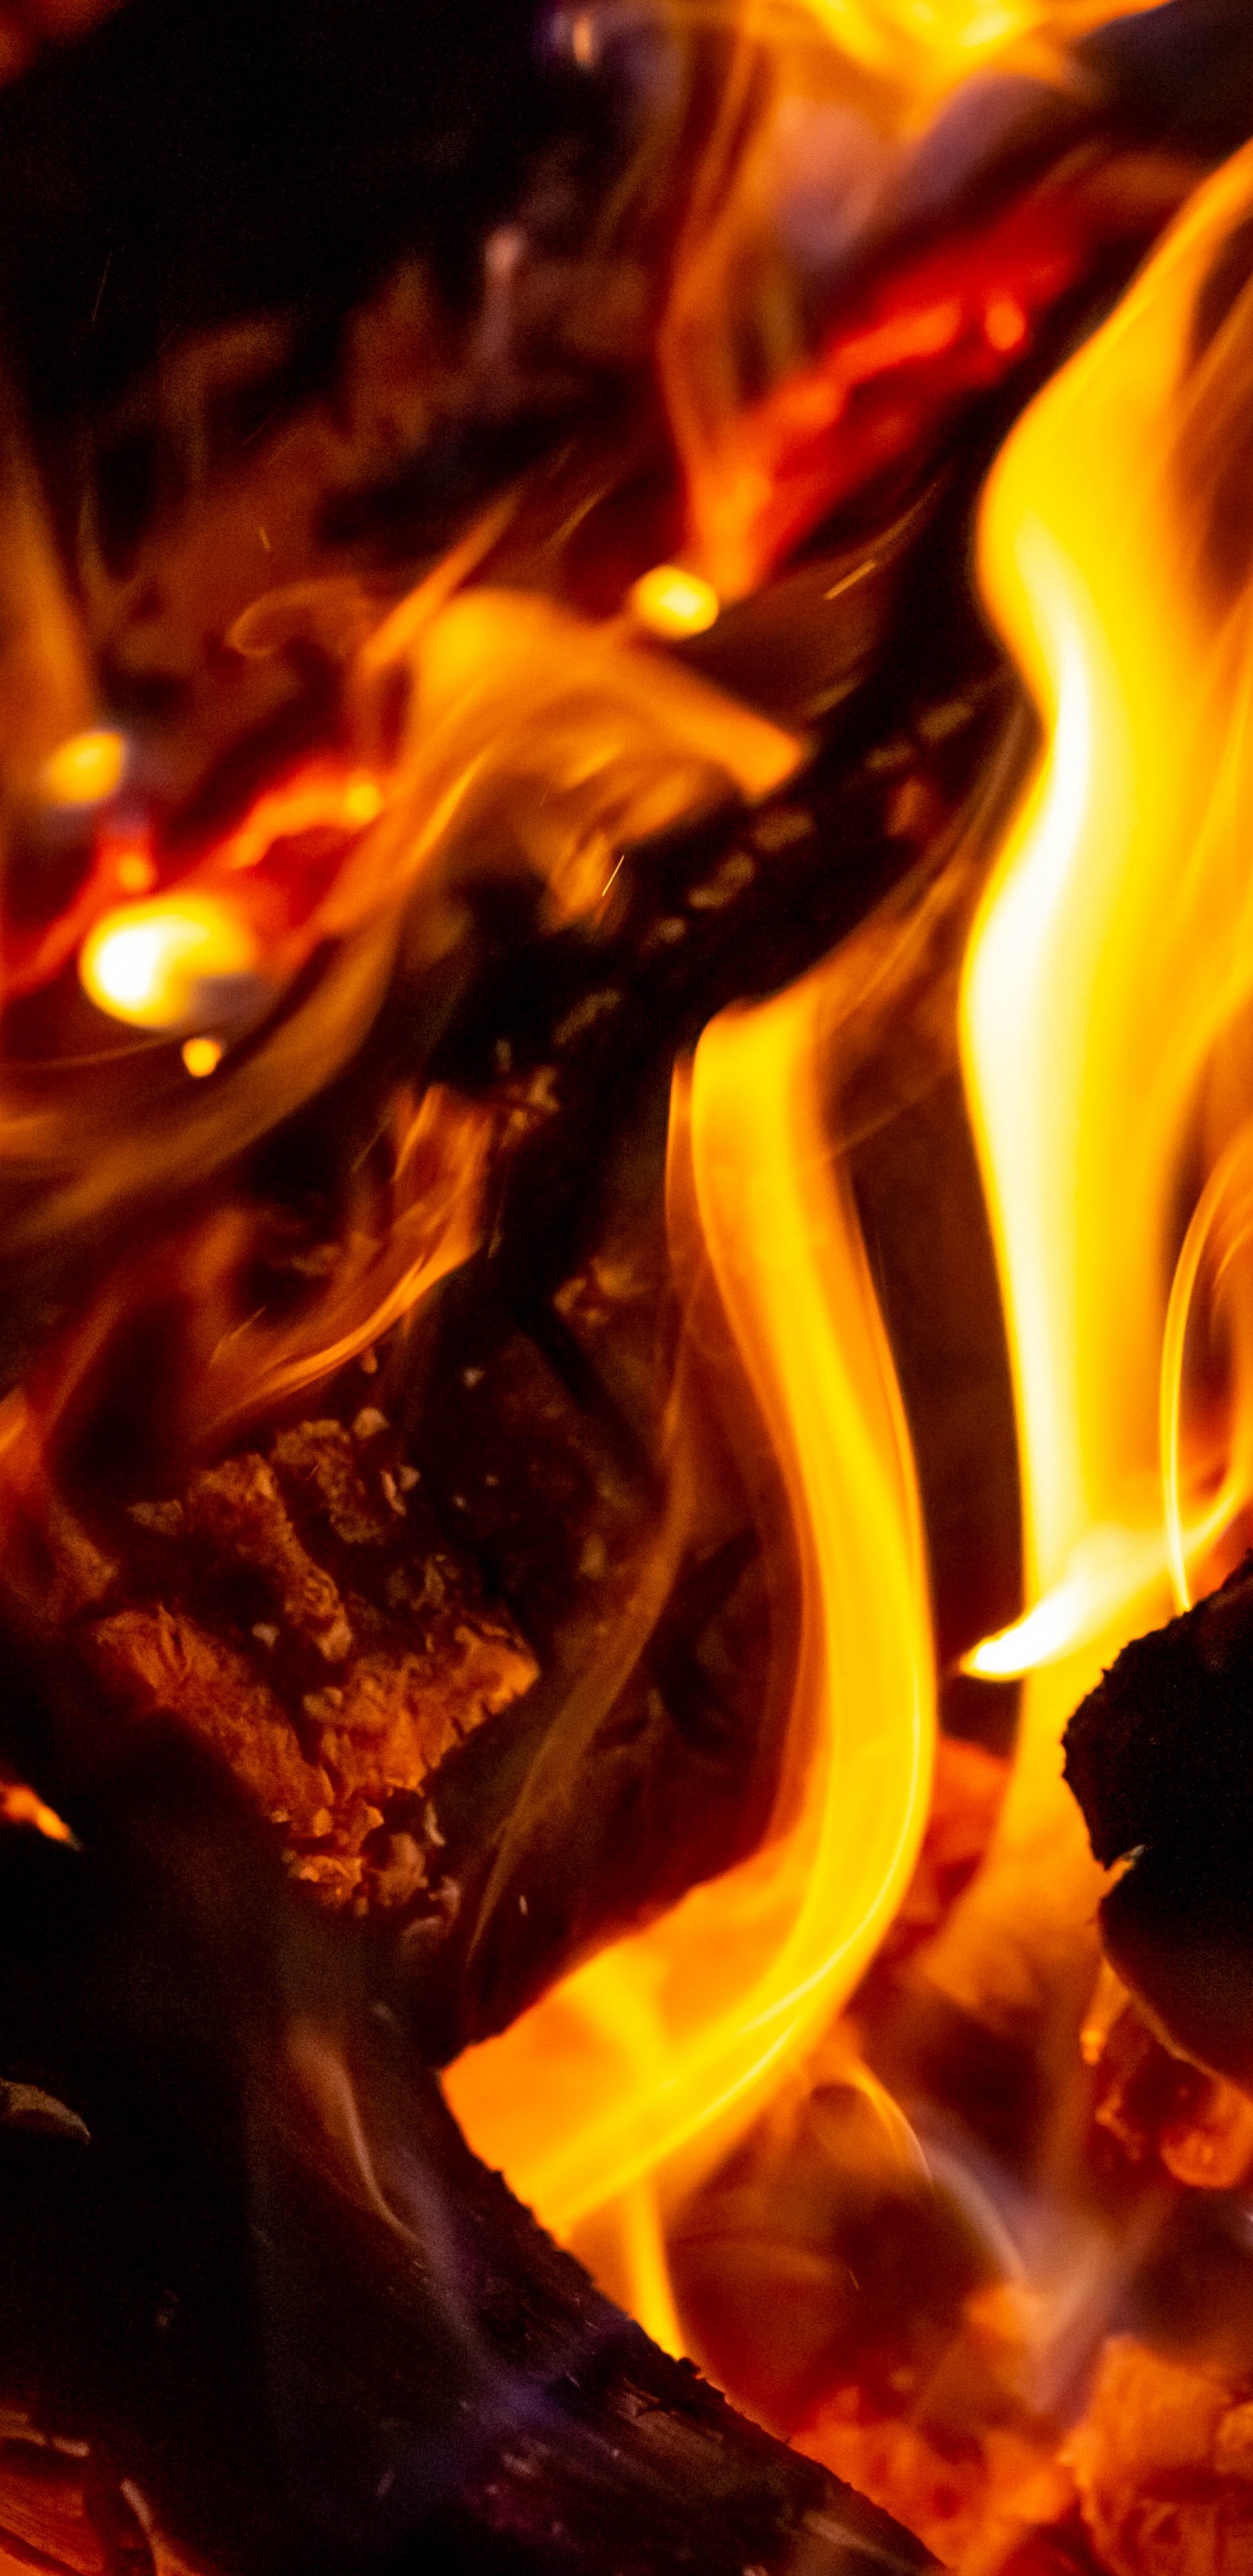 Orange and Black Fire in Close up Photography. Wallpaper in 1440x2960 Resolution